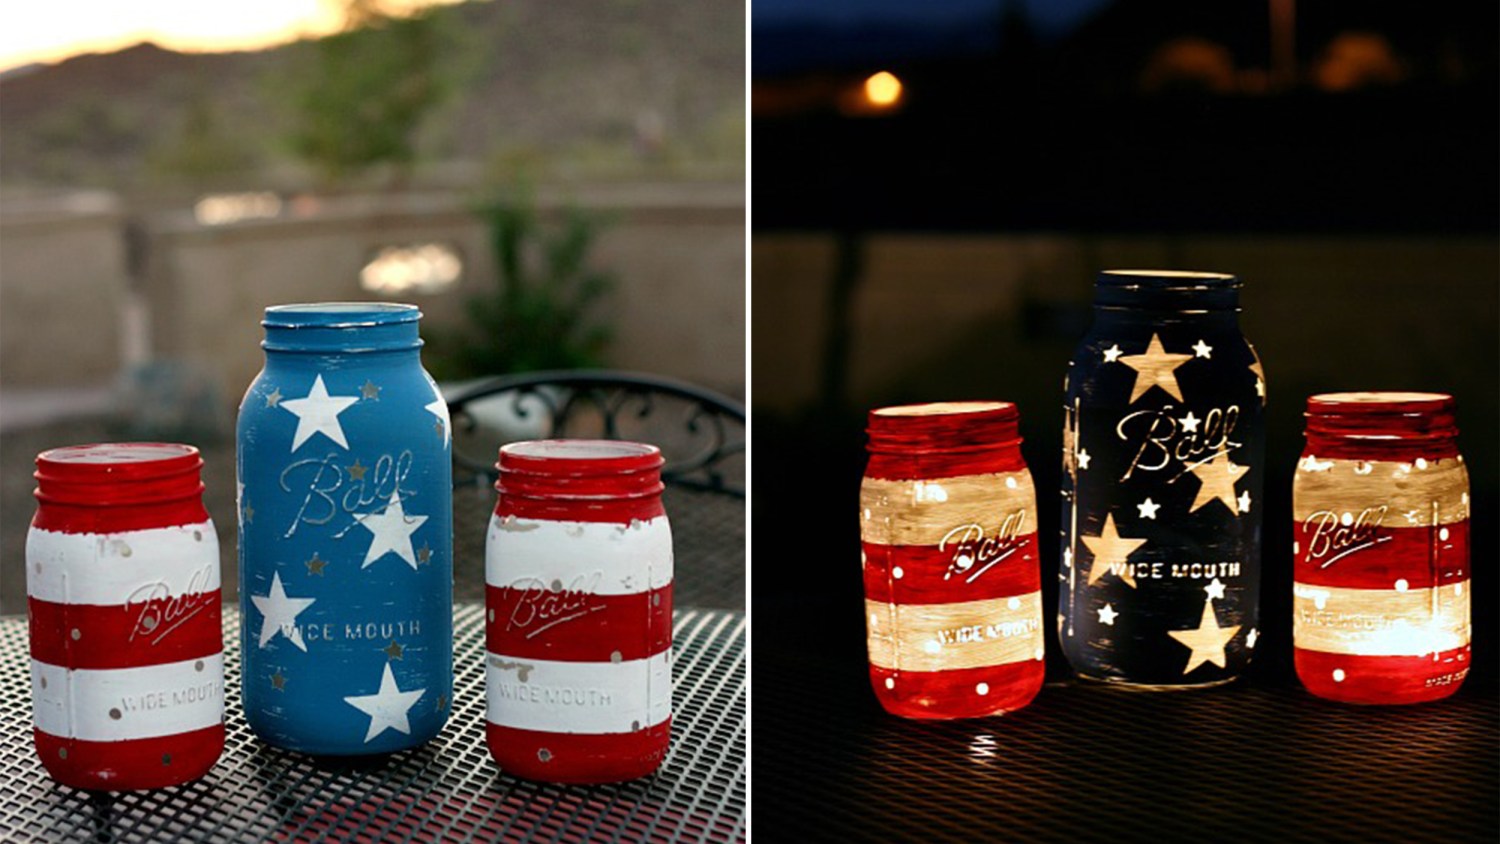 Creative Mason Jar Tops for the DIY Crowd - The Make Your Own Zone